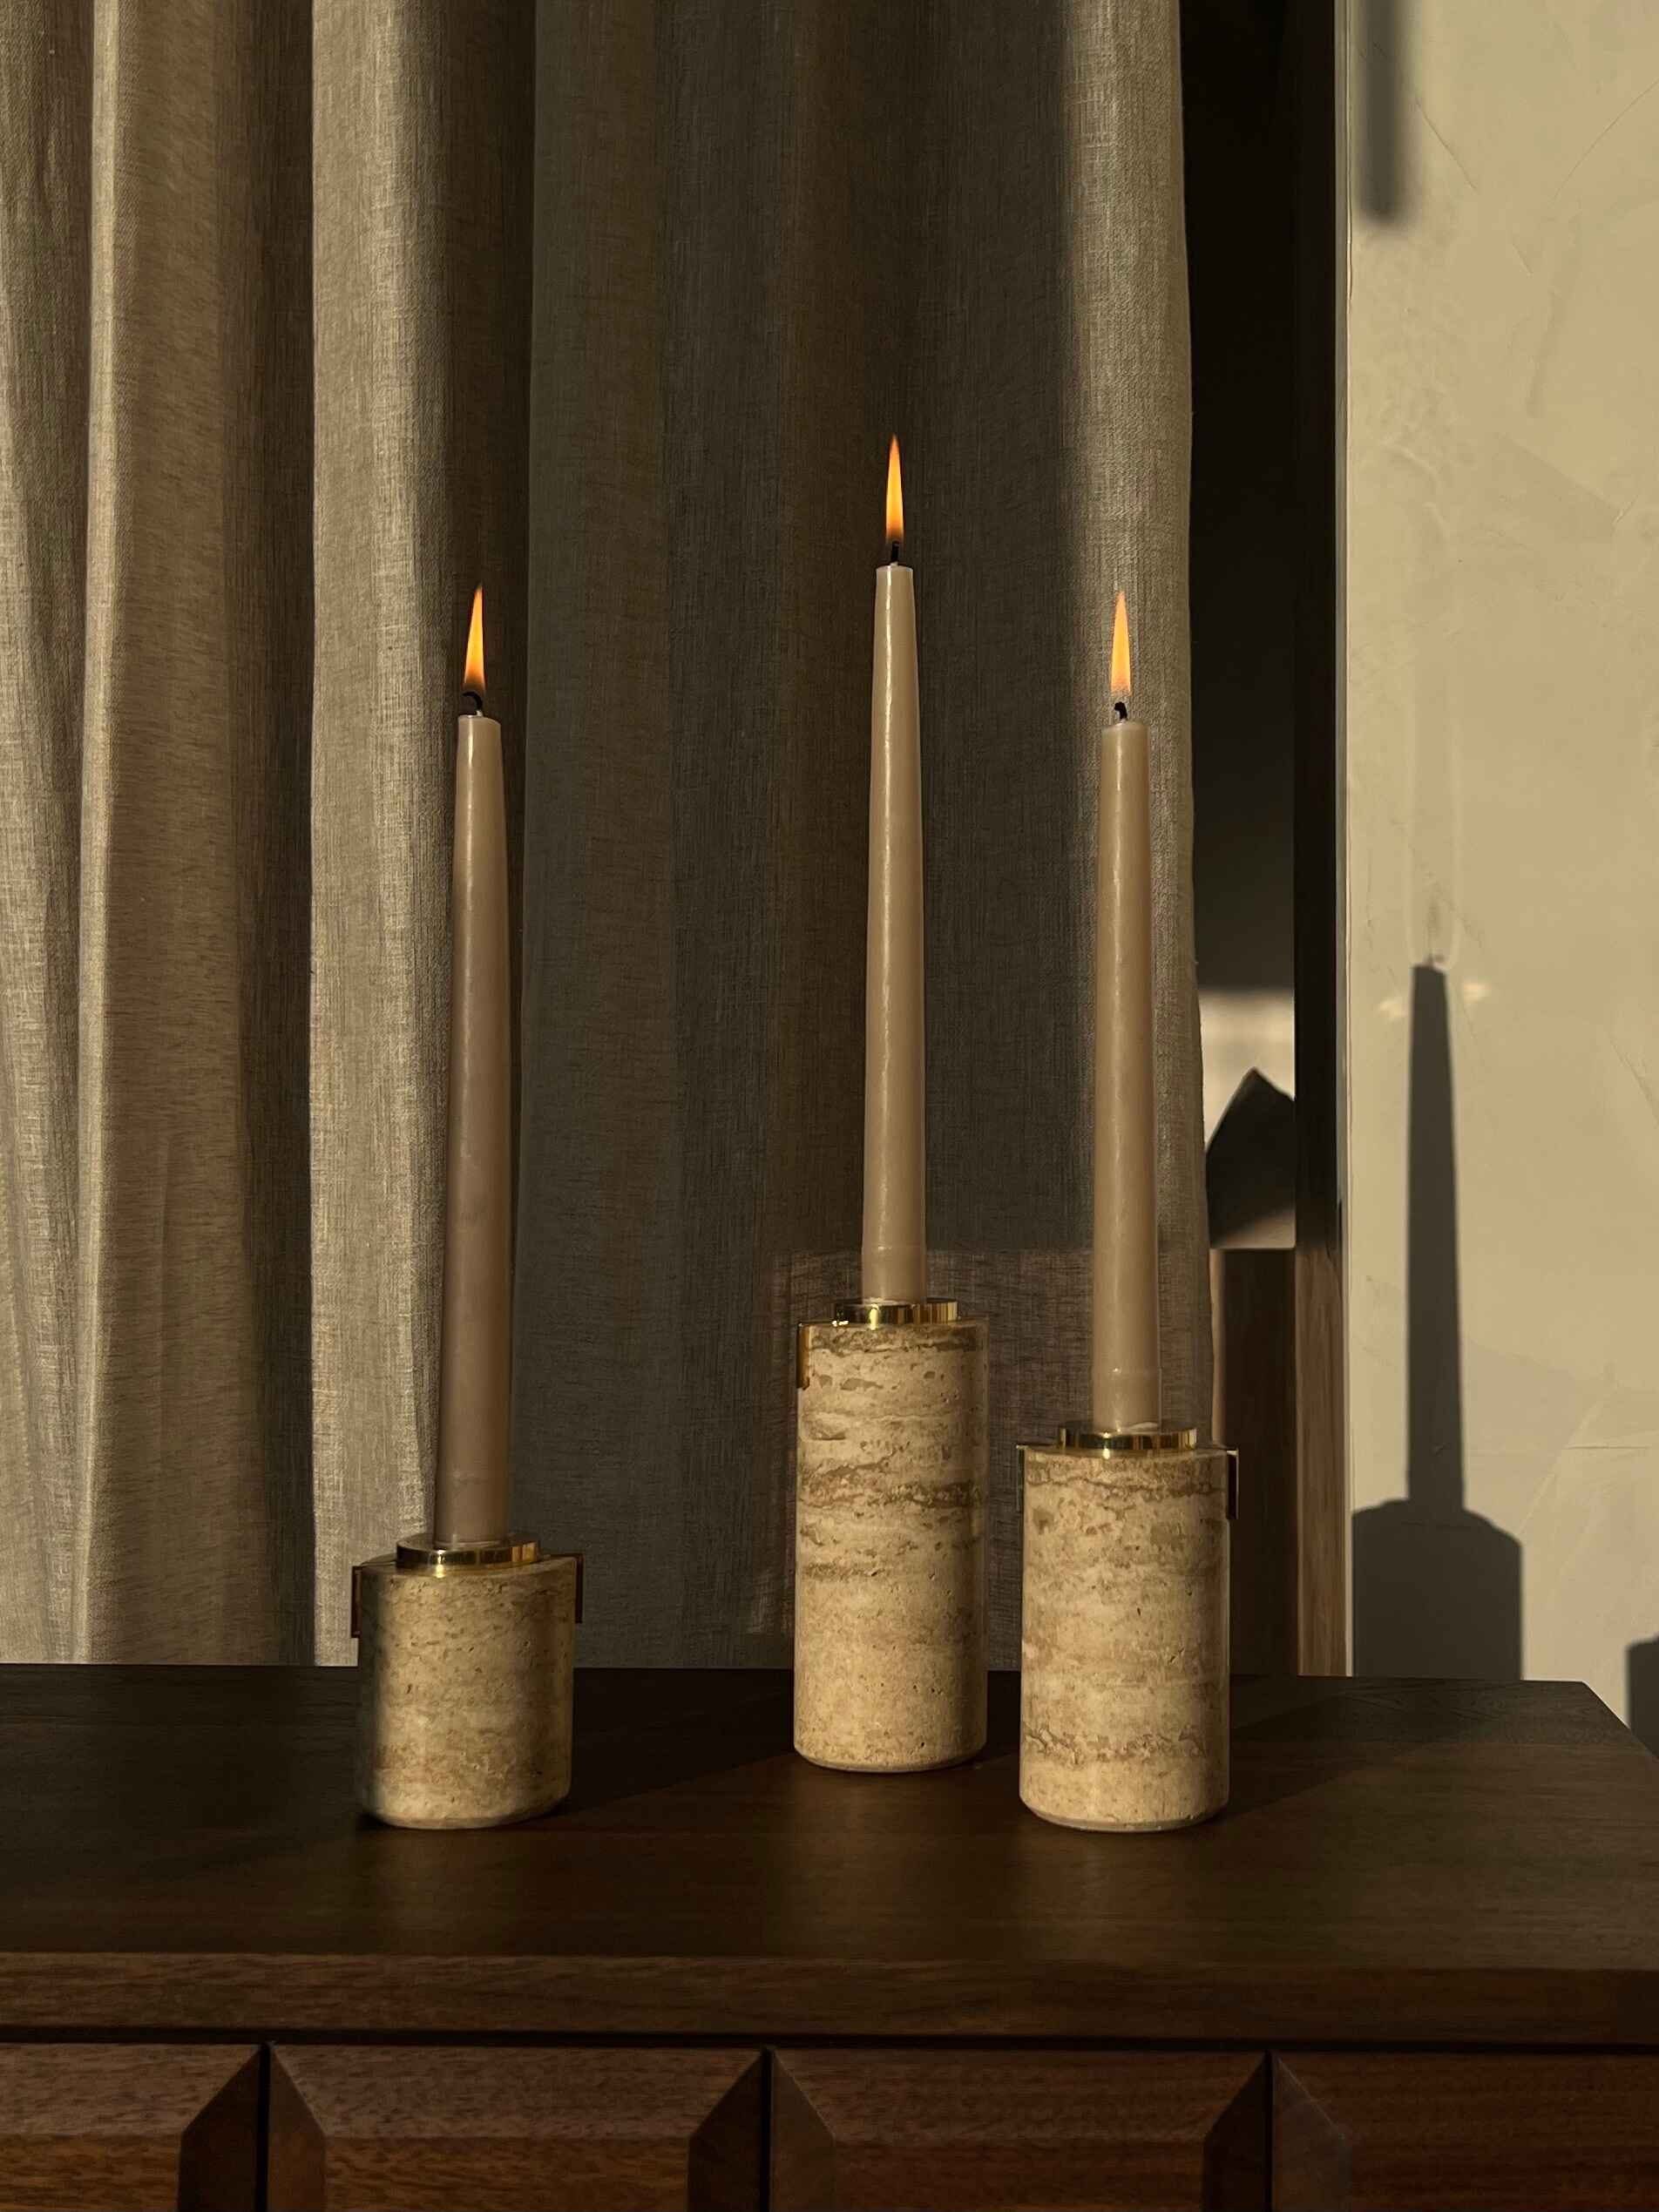 3 marble stone candle holders with grey lit candles in each, by Afternoon Light. 